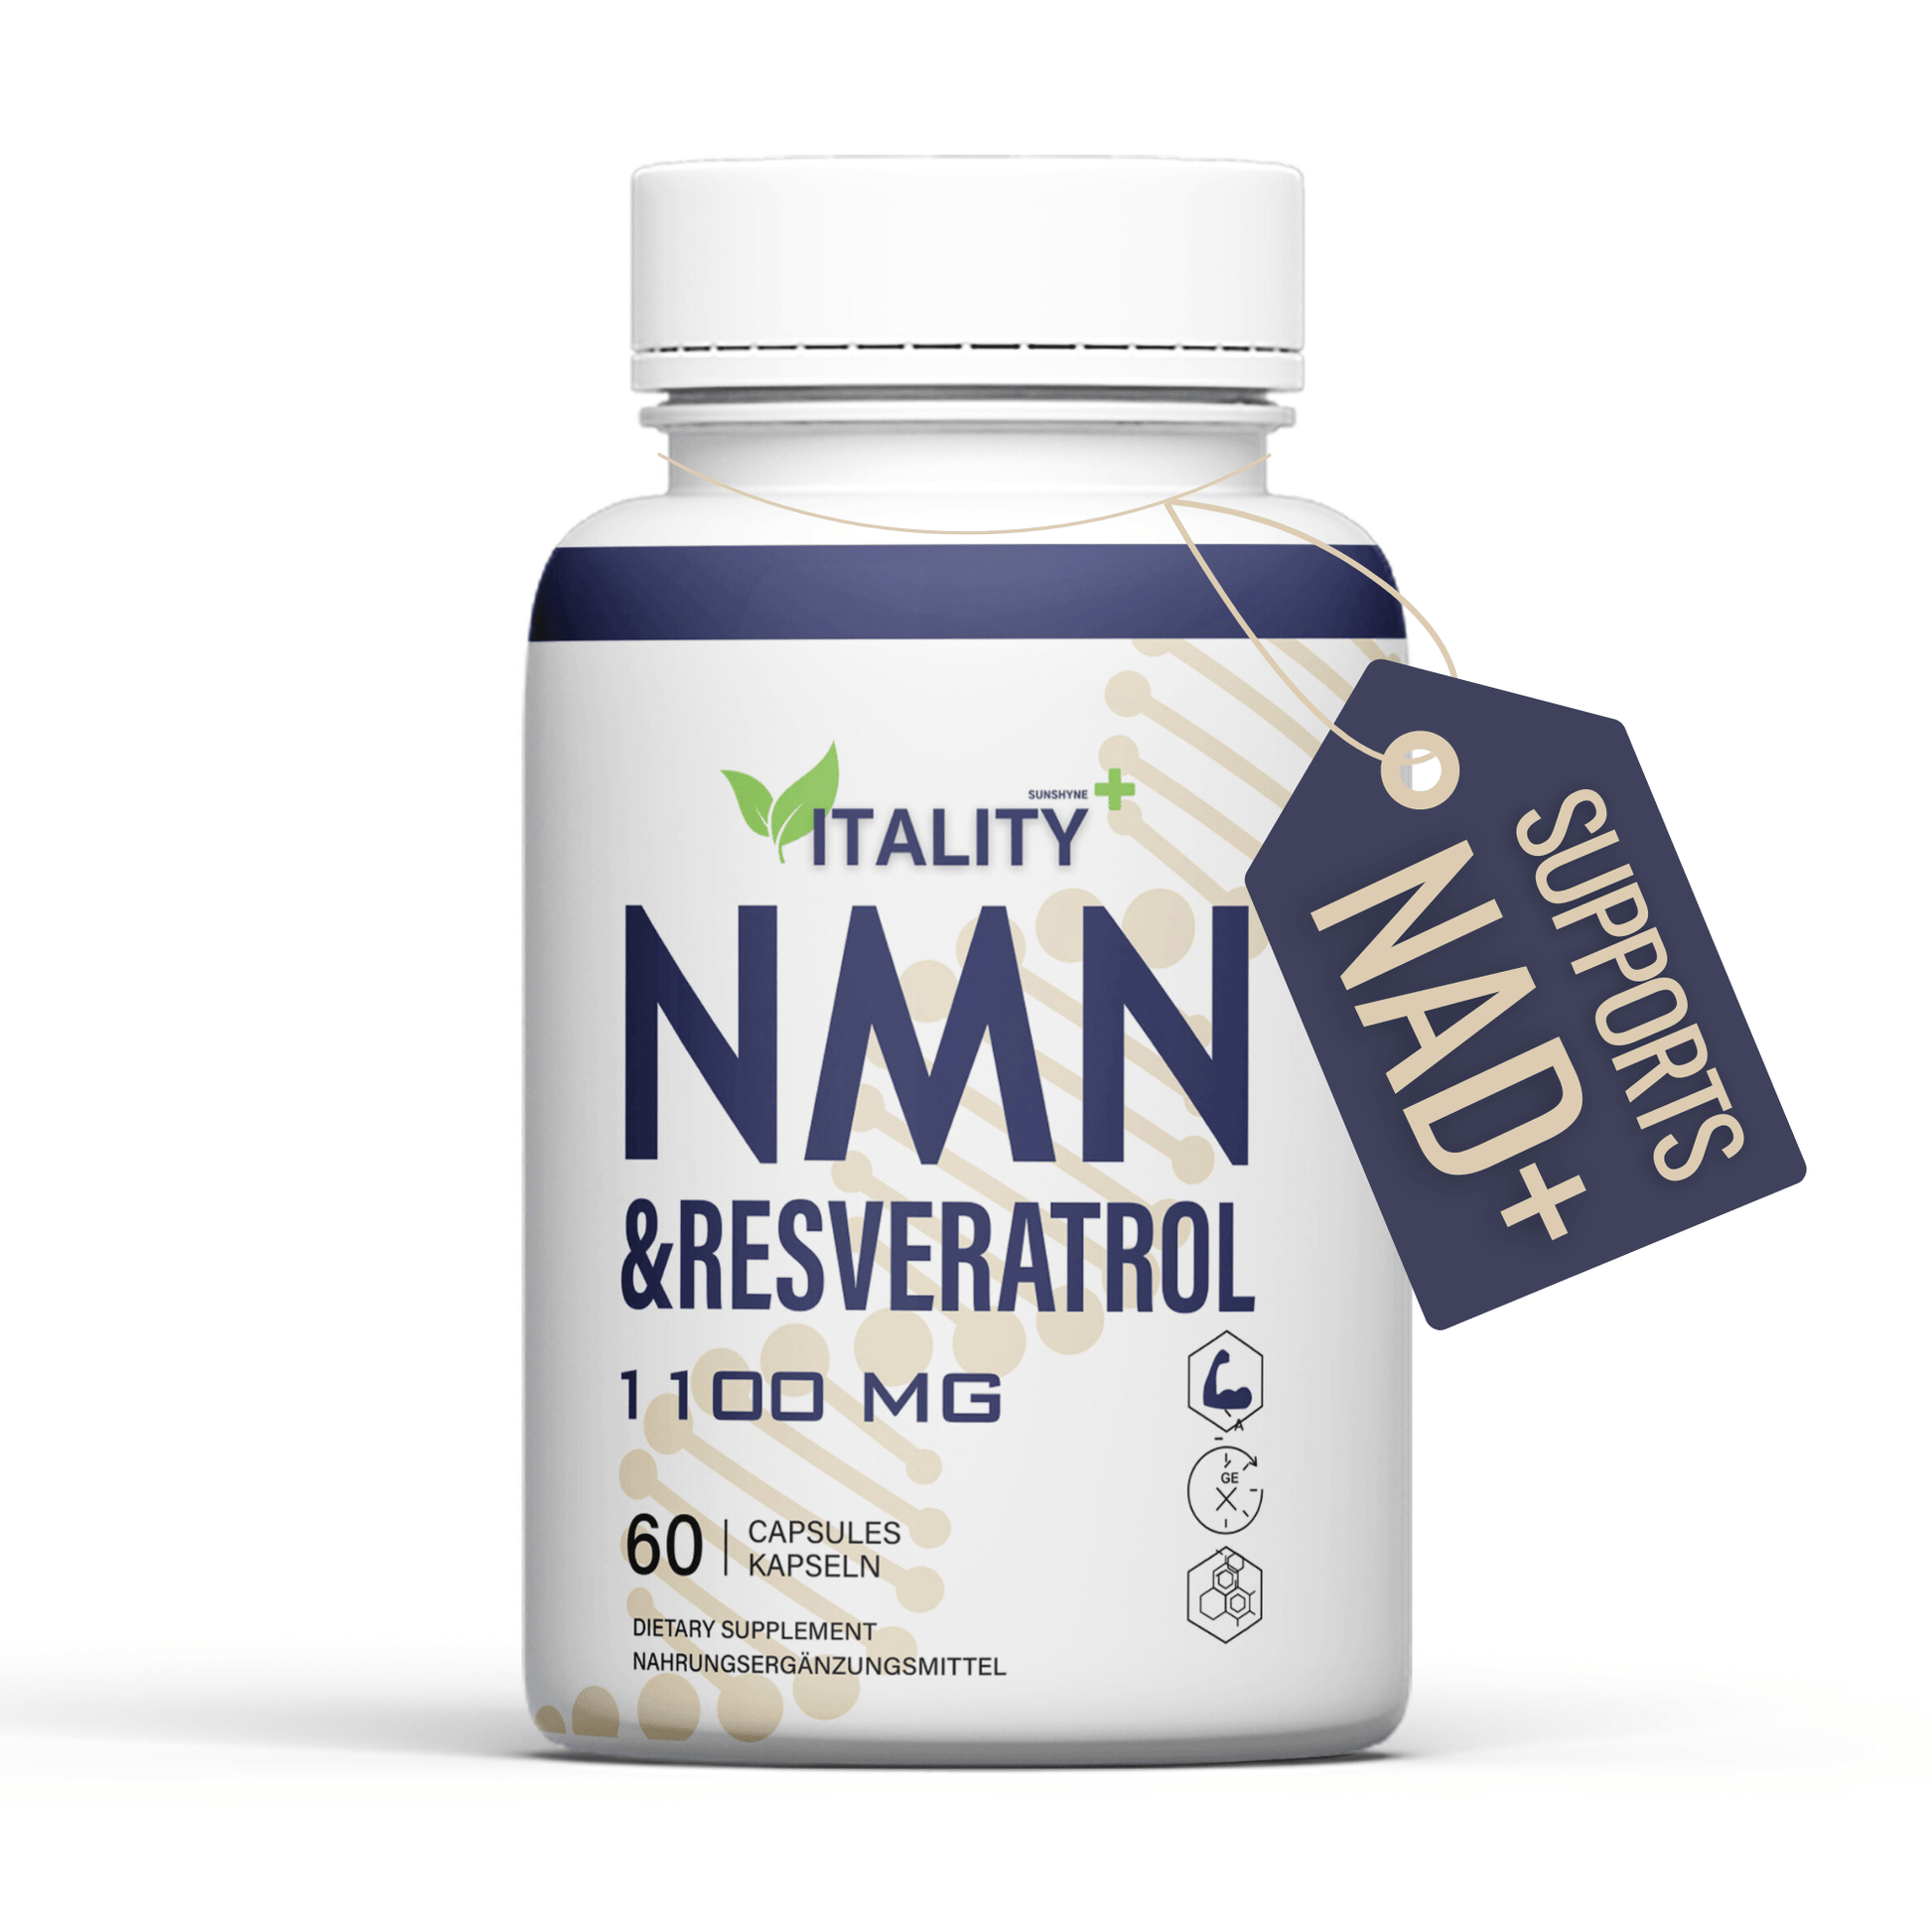 NMN & Resveratrol NAD+ Supplement 1100mg 60 Capsules - 1 Months Supply - Vitality Supplements